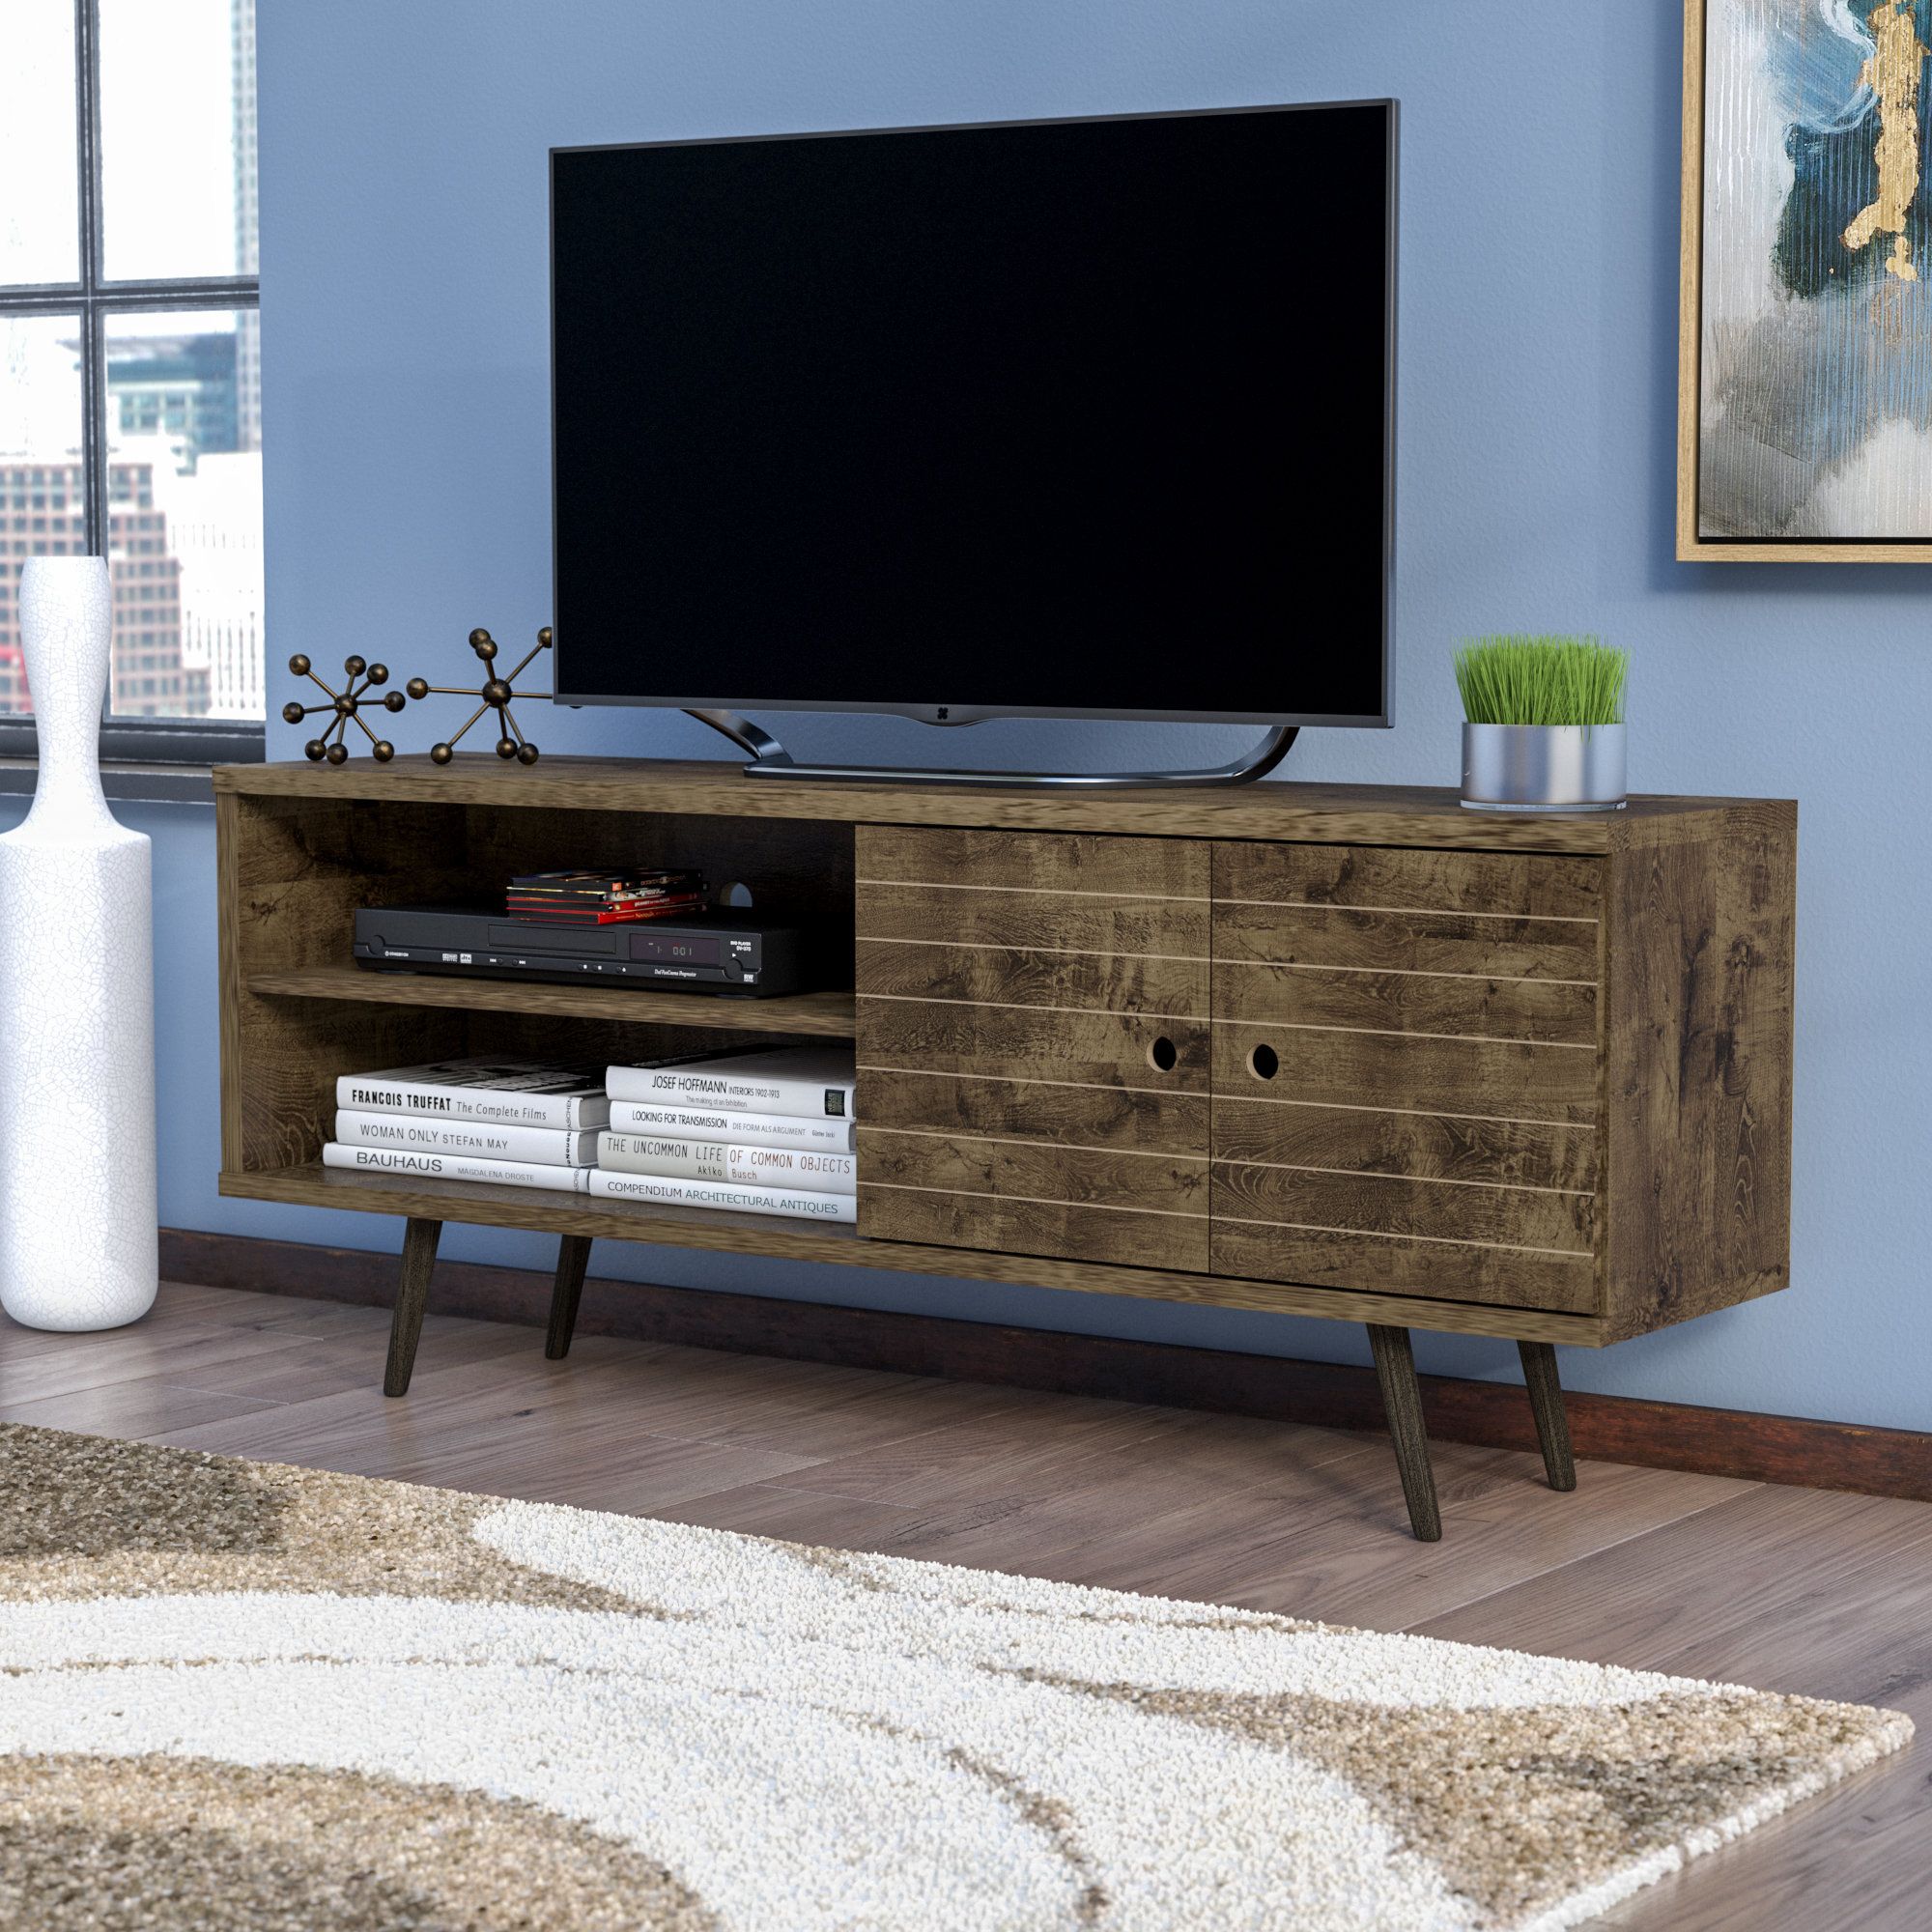 Mistana Hal Tv Stand For Tvs Up To 60" & Reviews | Wayfair Intended For Century Blue 60 Inch Tv Stands (Photo 7 of 30)